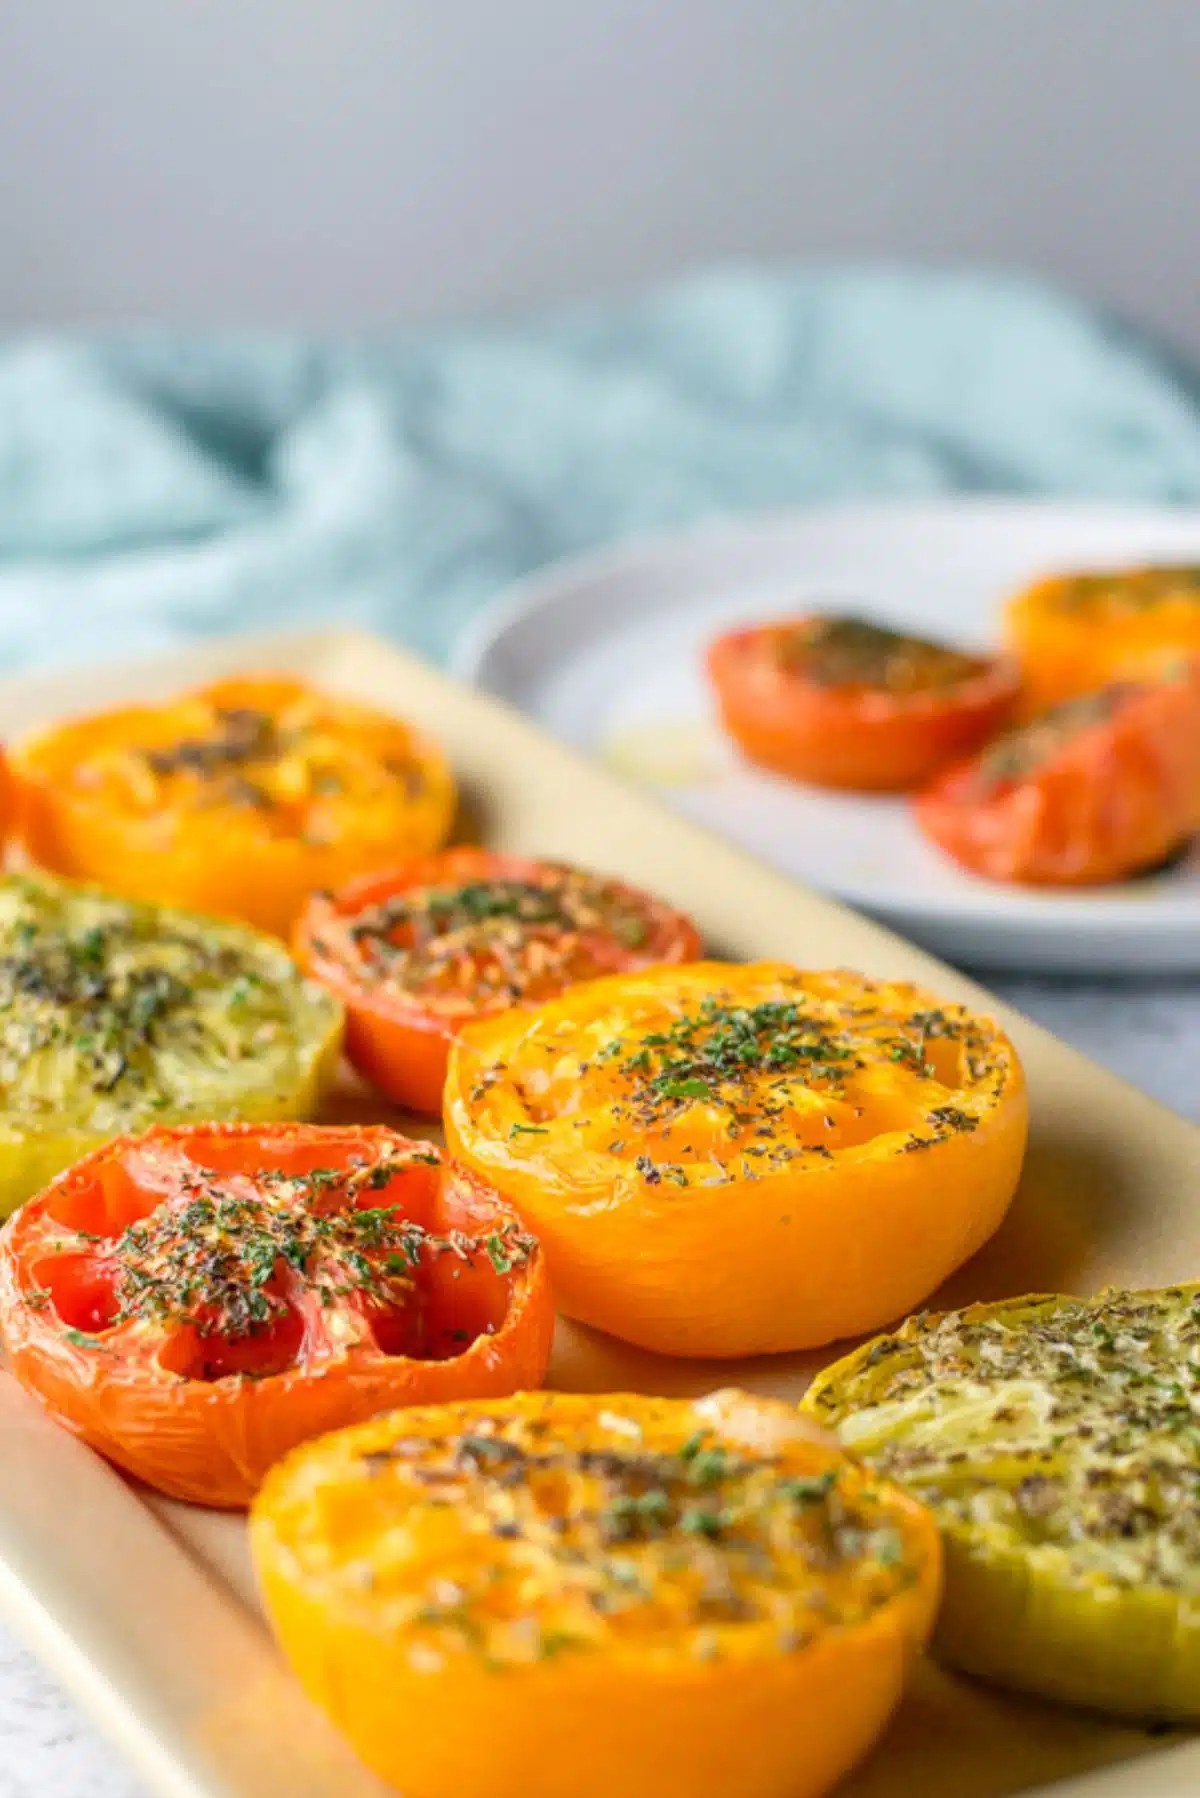 Tomato halves with oil and herbs on it